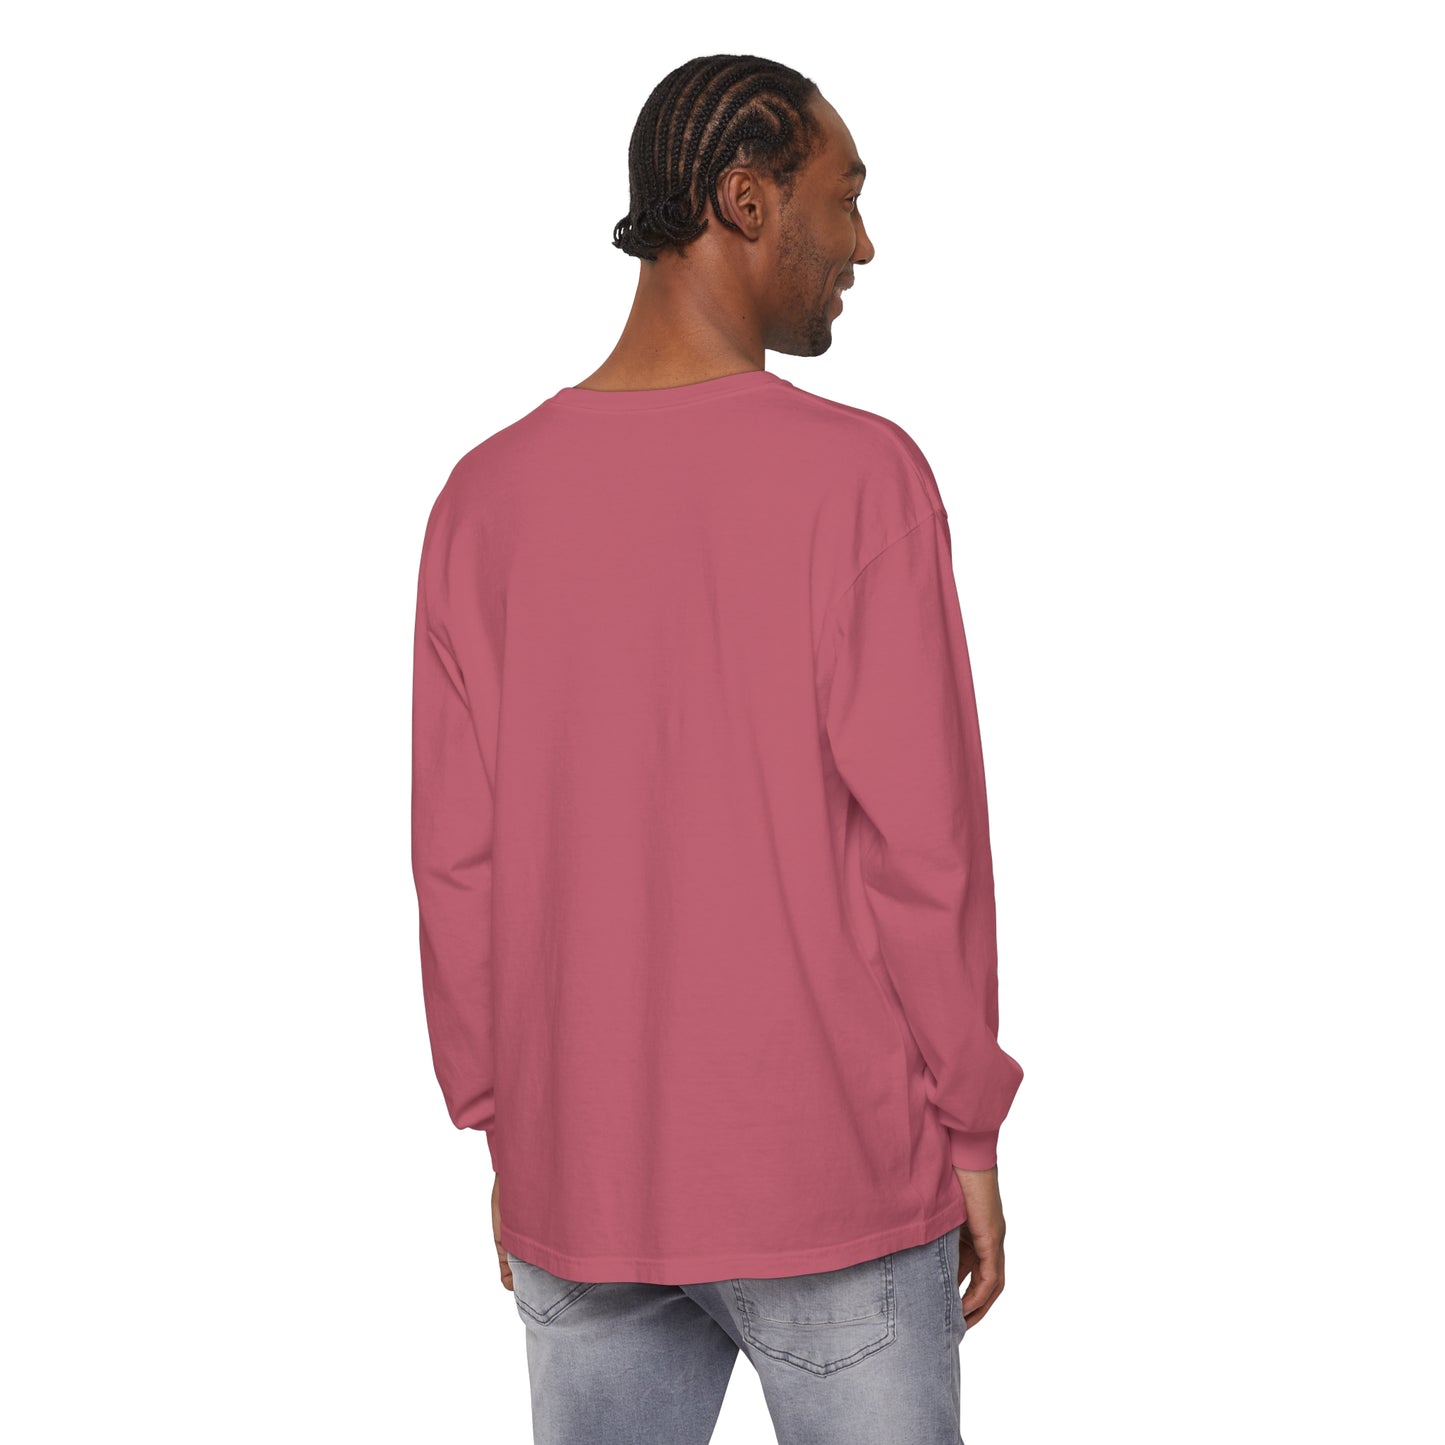 The back of a man wearing a HO HO HO Santa Outline Pink Long Sleeve Tee - Cozy Comfort Colors Unisex Shirt - Crewneck Holiday tee from Printify.